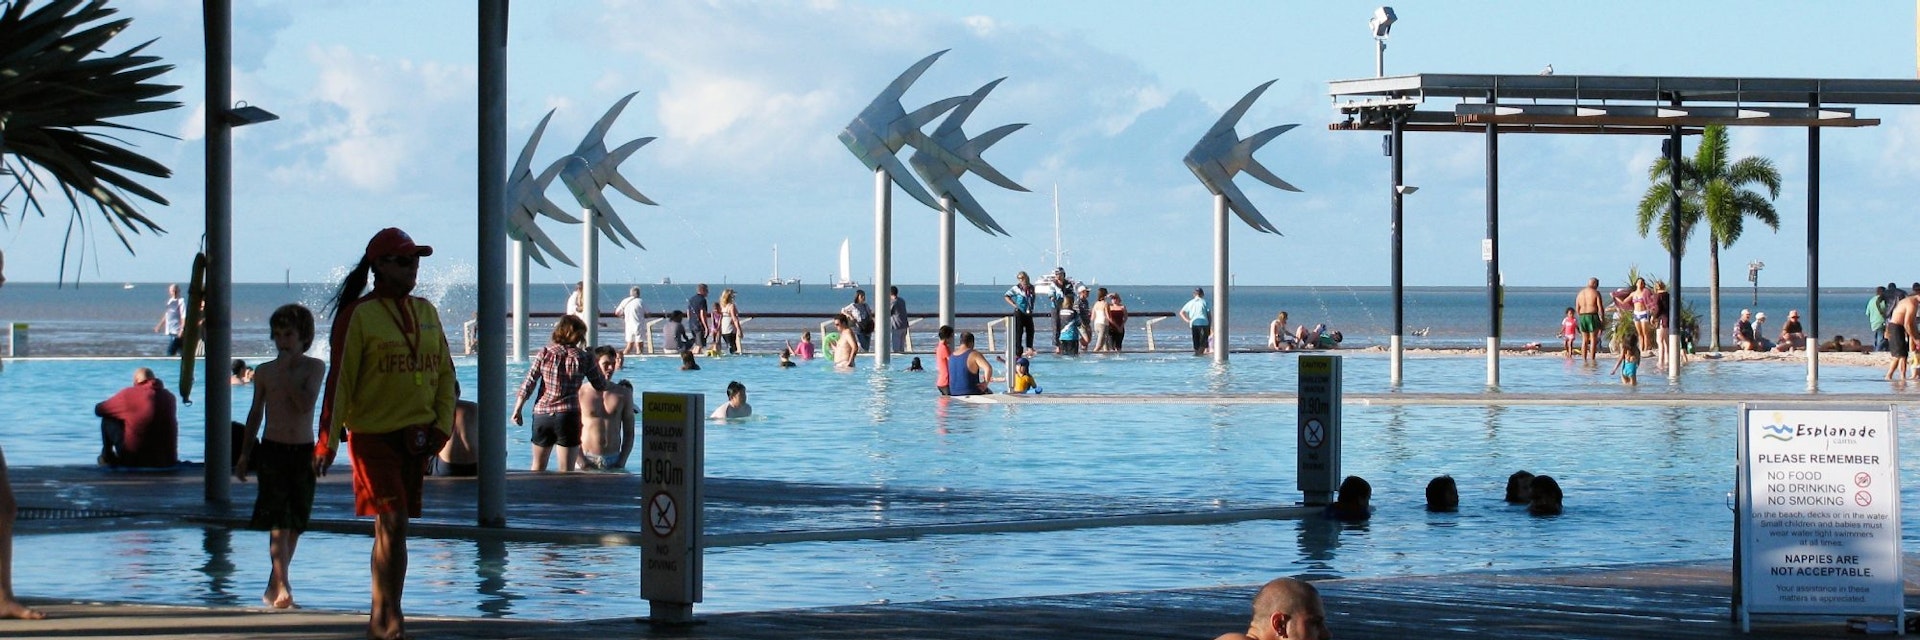 People by the pool at the Cairns Esplanade Lagoon with the fish sculptures in the background in Cairns, Queensland, Australia.